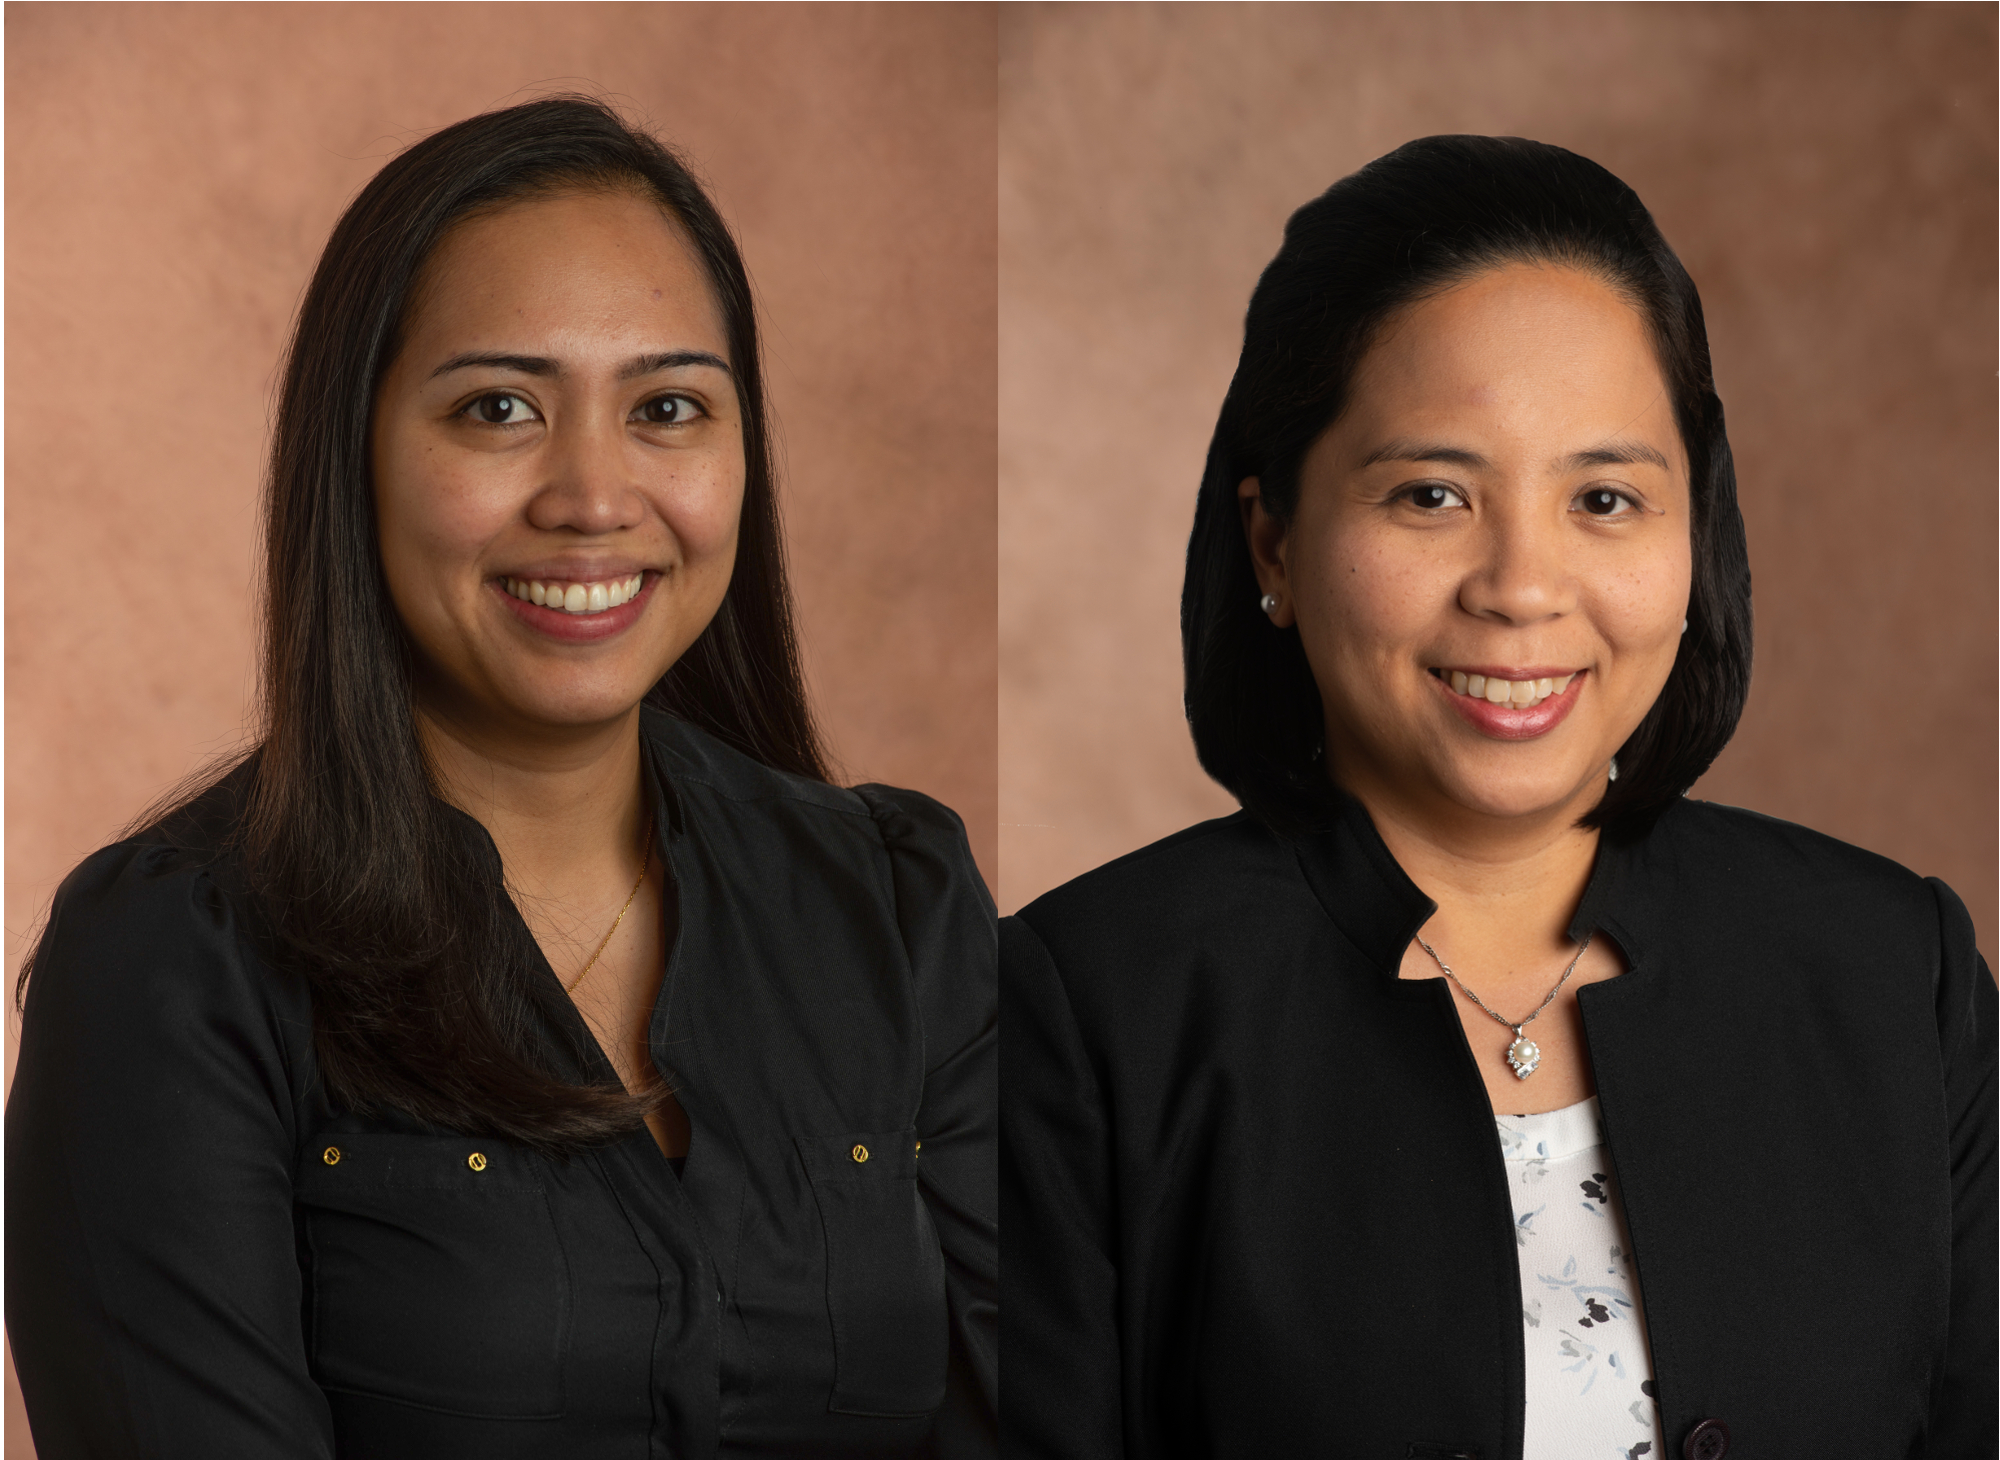 Dr. Maria Demma Cabral and Dr. Ethel Clemente